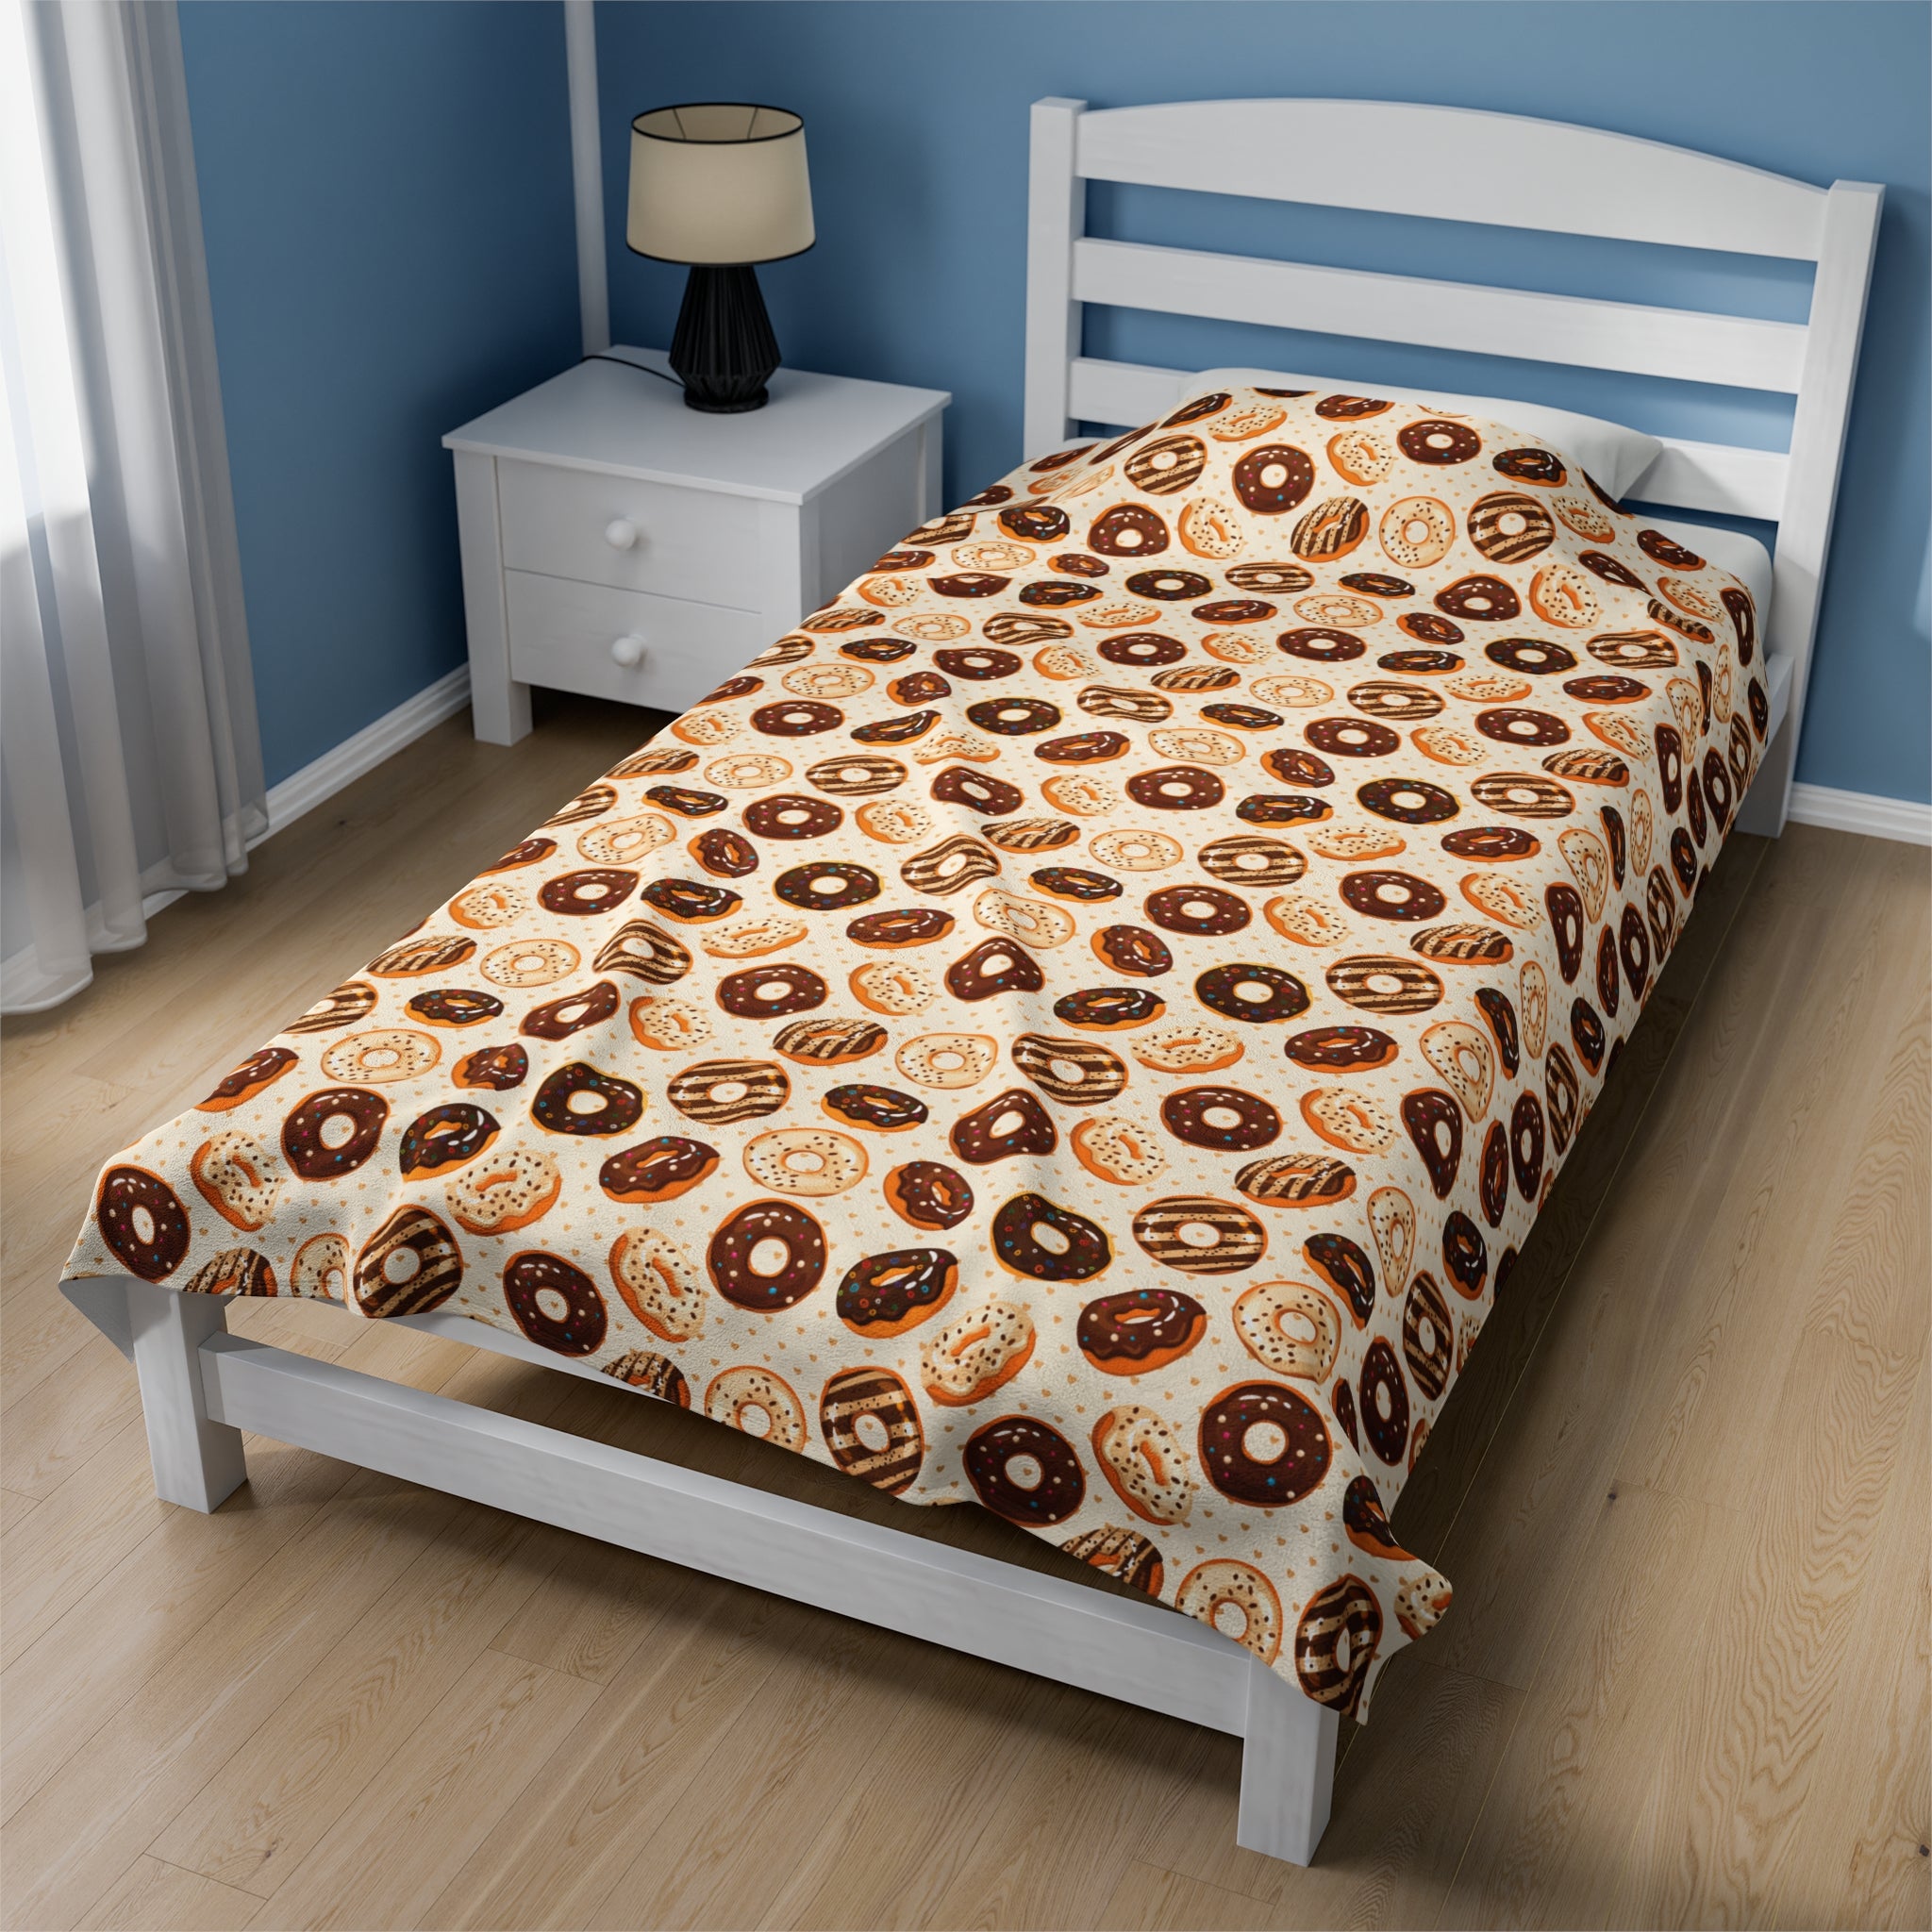 Chocolate Donuts Soft Blanket